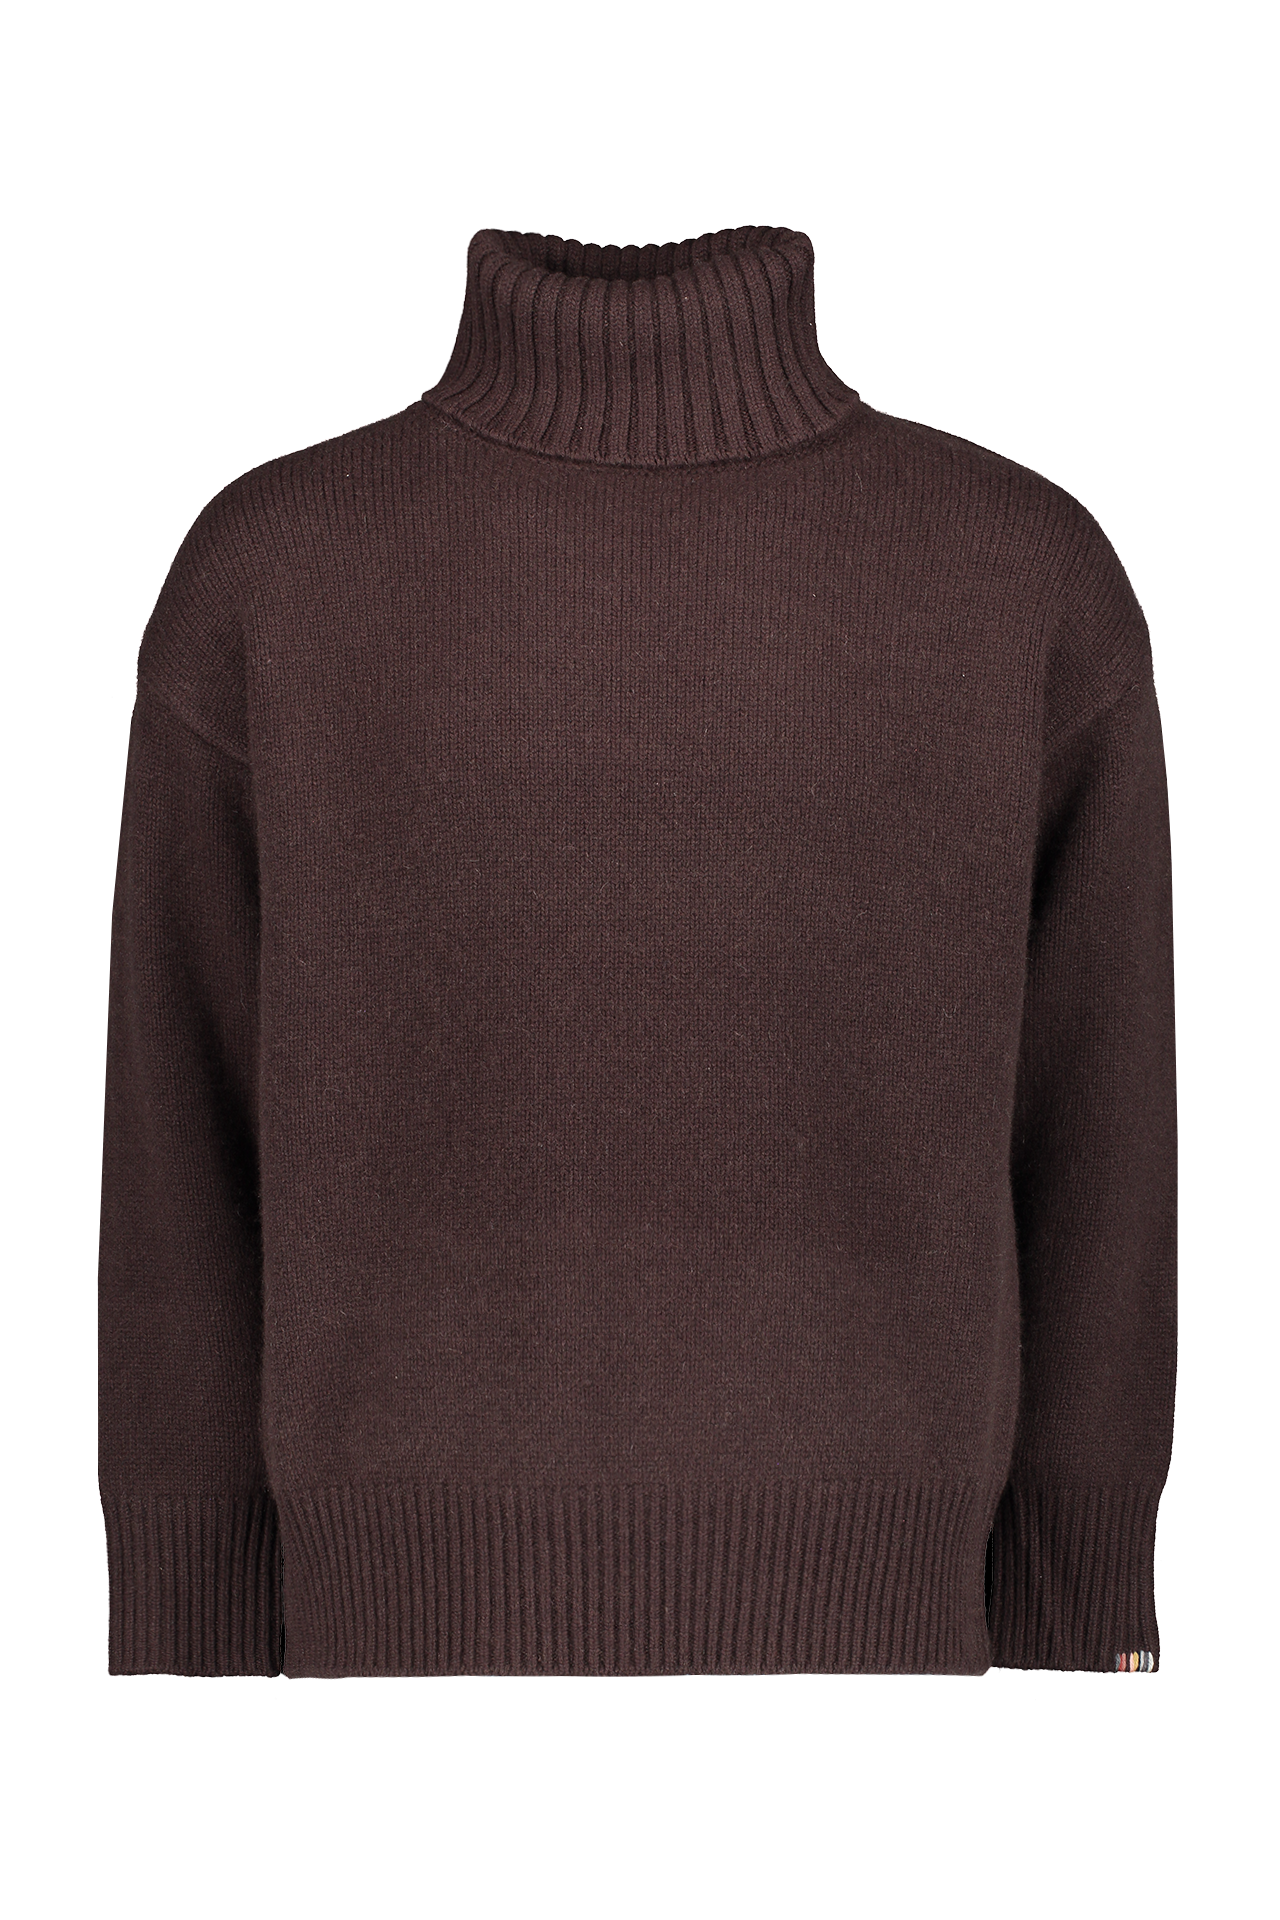 Extreme Cashmere Women's N°20 Oversize Xtra Sweater | A.K. Rikk's